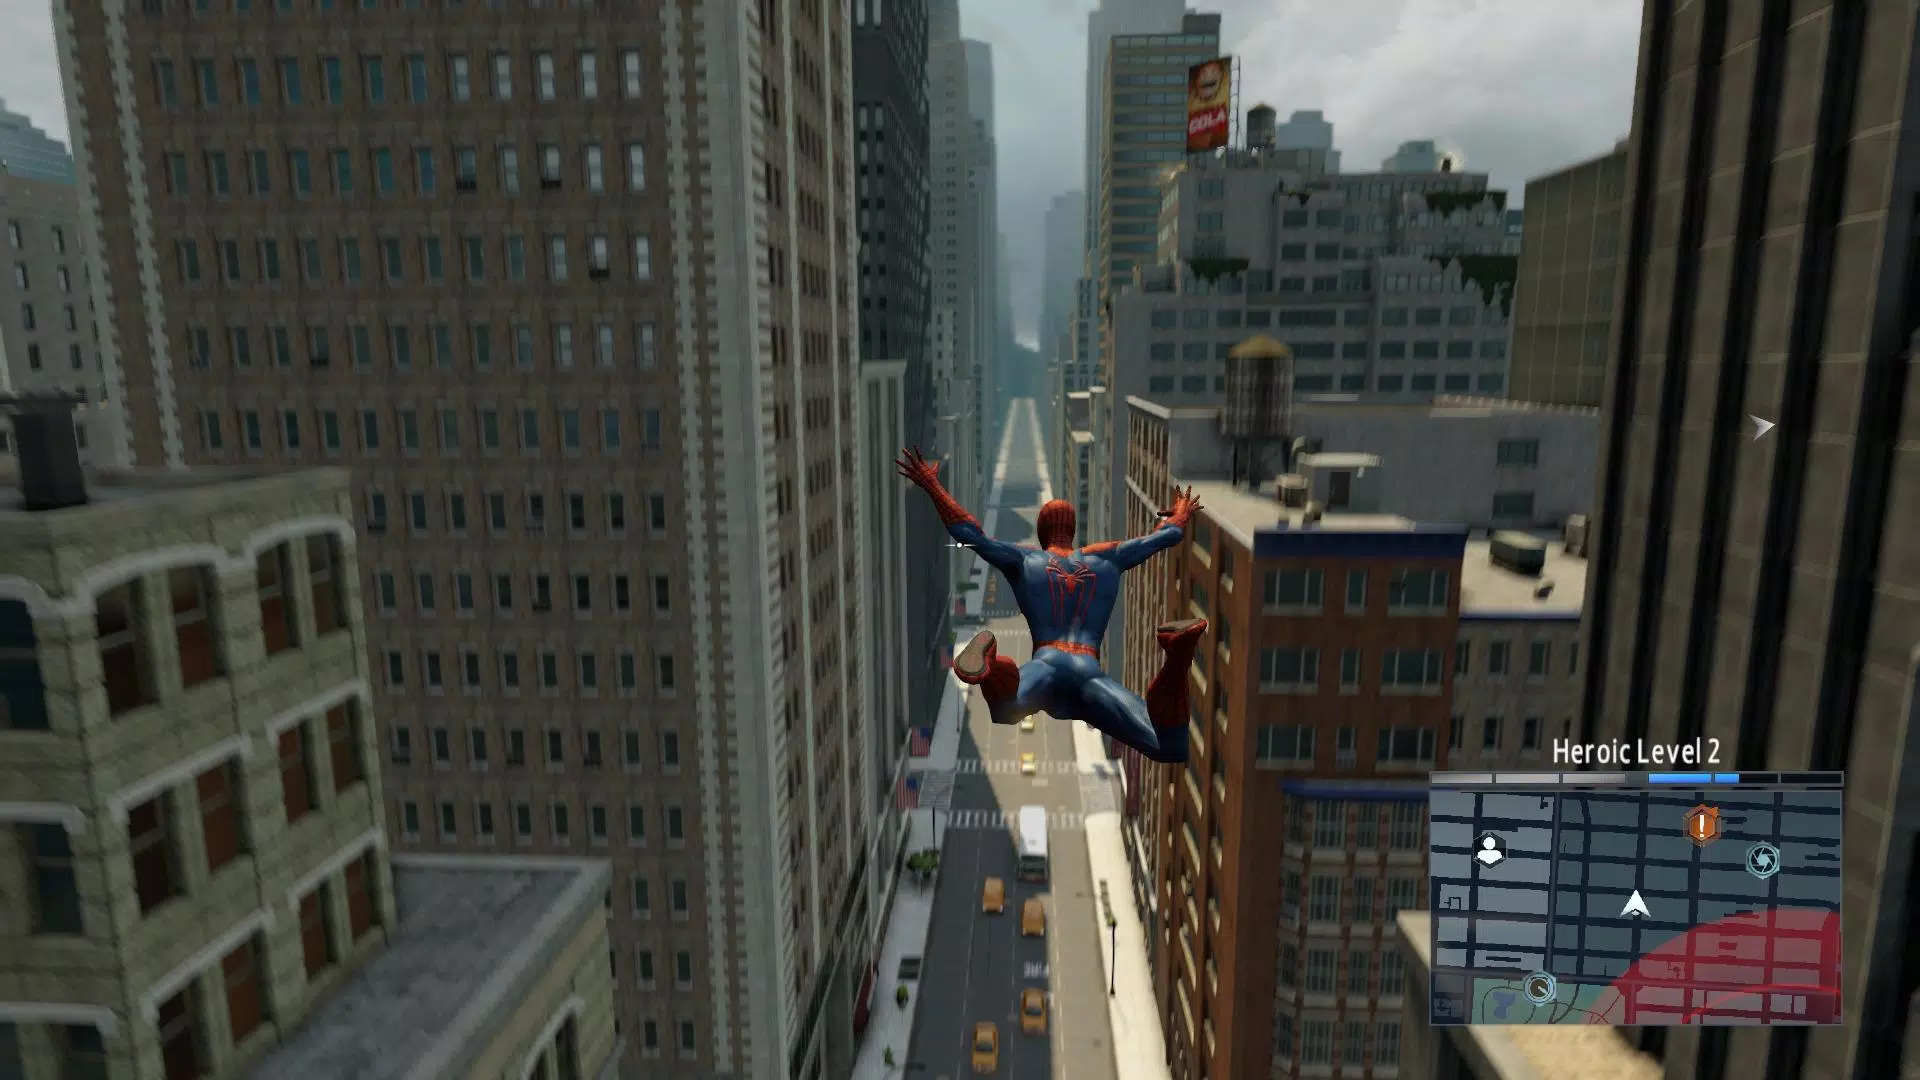 The amazing spider man 3 APK for Android Download